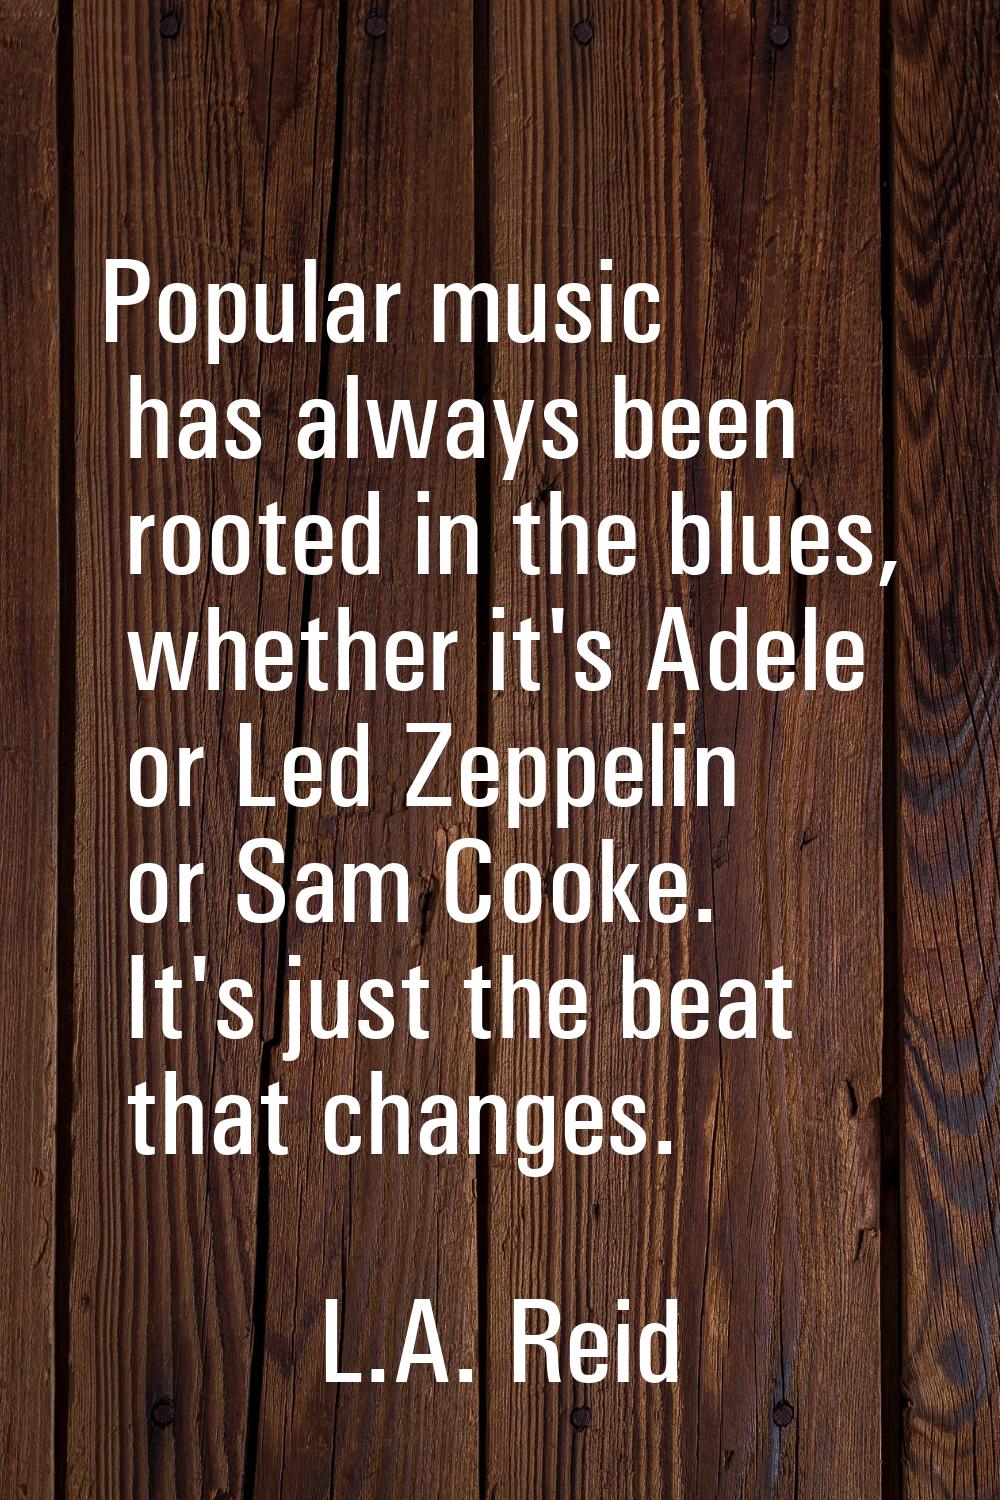 Popular music has always been rooted in the blues, whether it's Adele or Led Zeppelin or Sam Cooke.